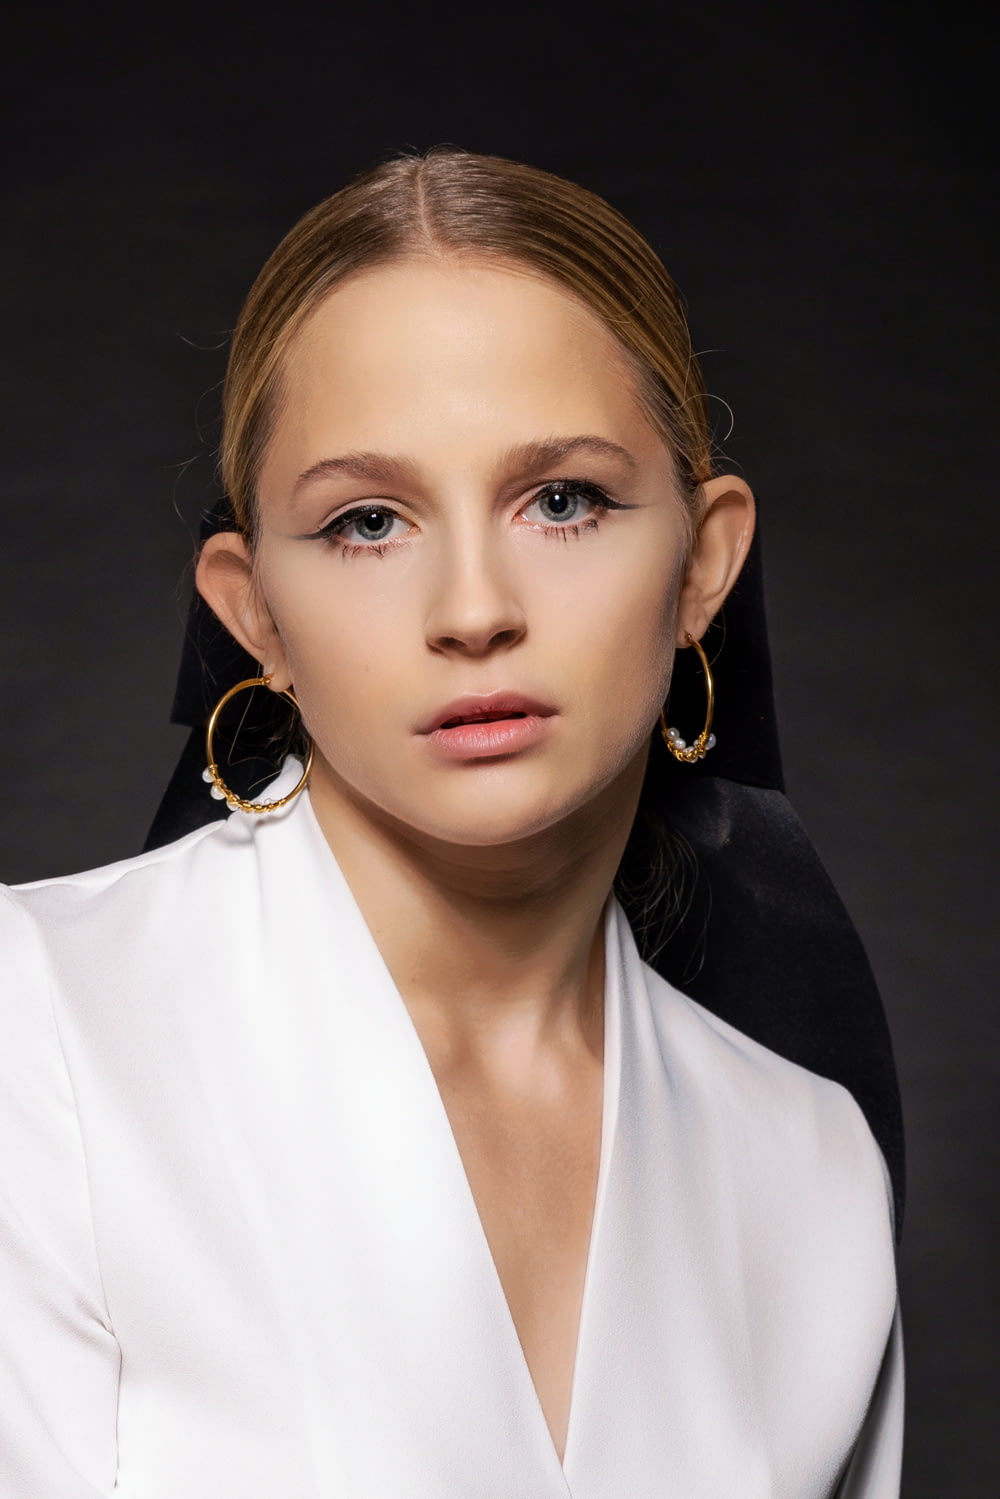 a woman in a white shirt and gold hoop earrings